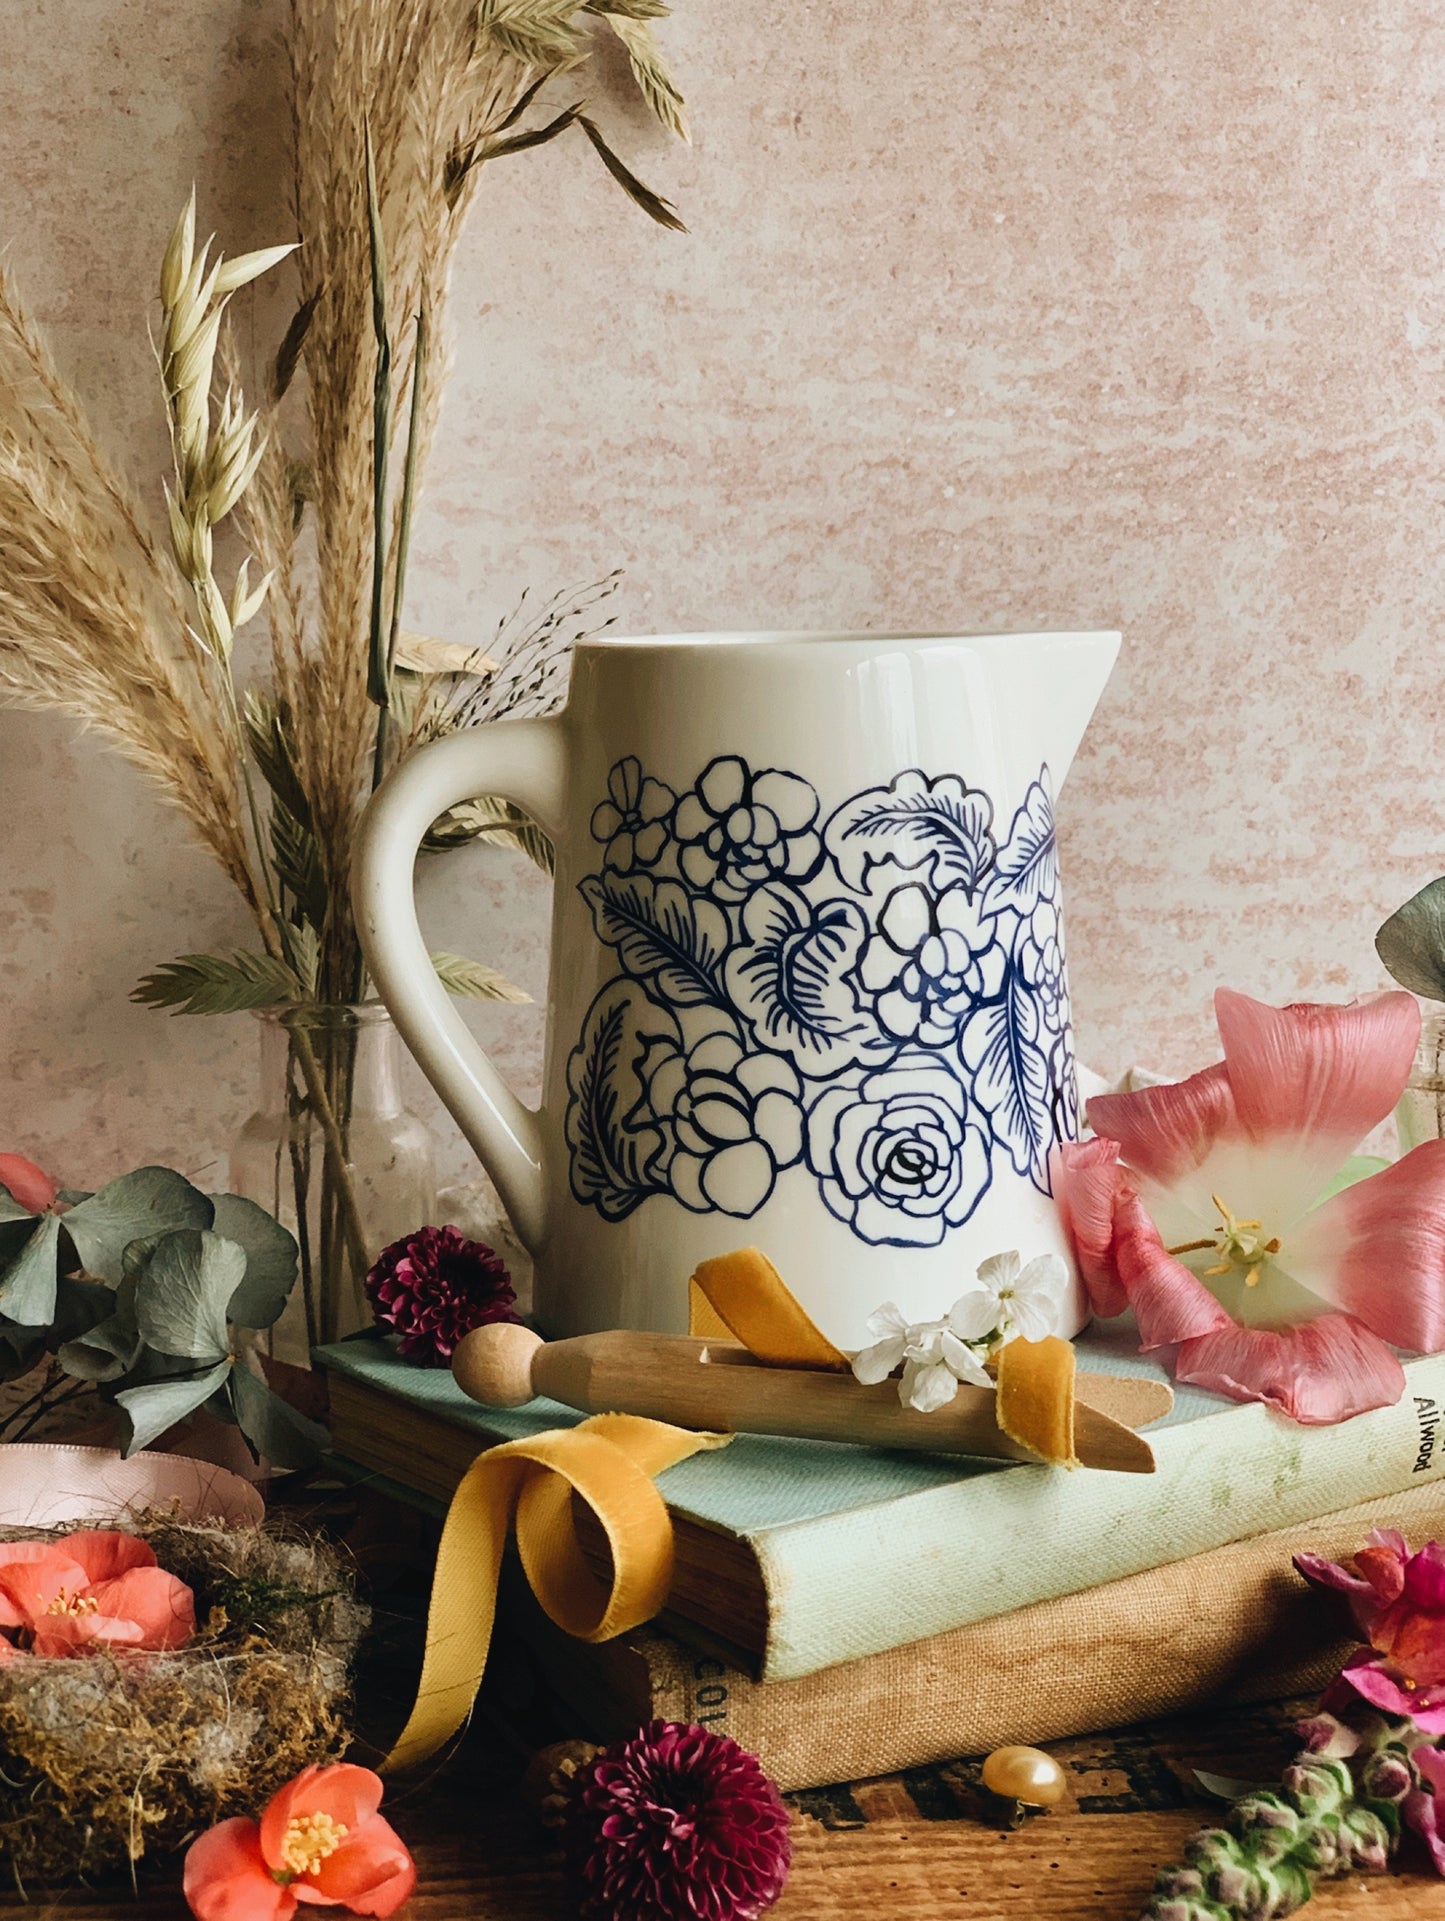 Rustic White Jug with Blue Florals Hand~painted